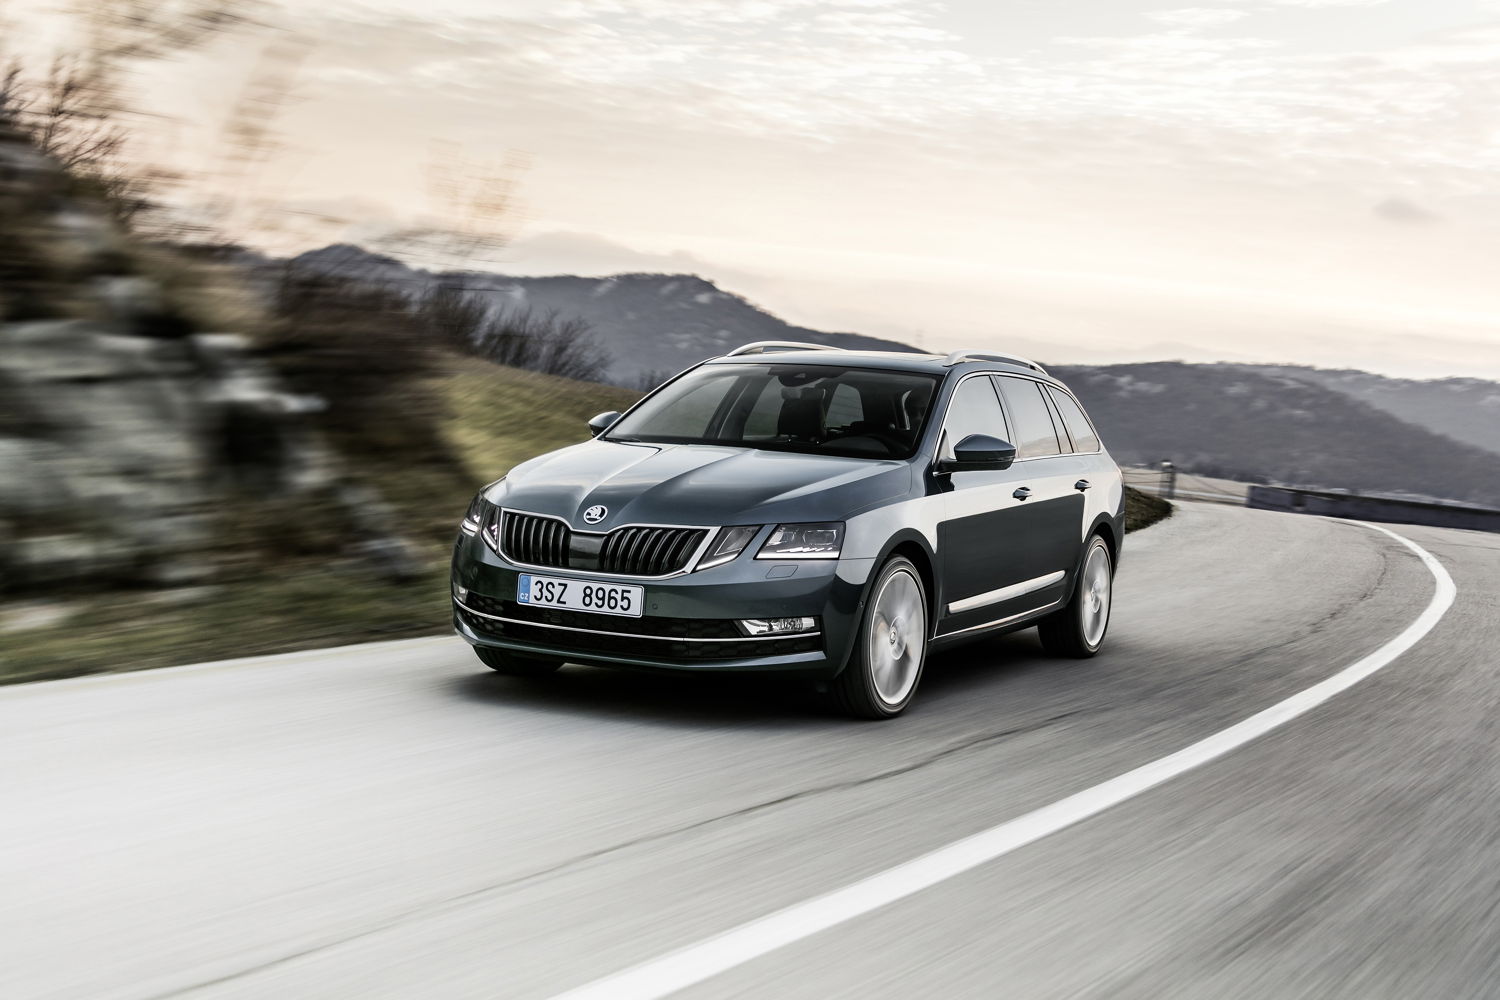 The ŠKODA OCTAVIA is once again the No. 1 amongst the import vehicles in the compact car segment. This is the verdict given by the readers of the specialist magazine ‘auto, motor und sport’ in the ‘Best Cars’ vote.